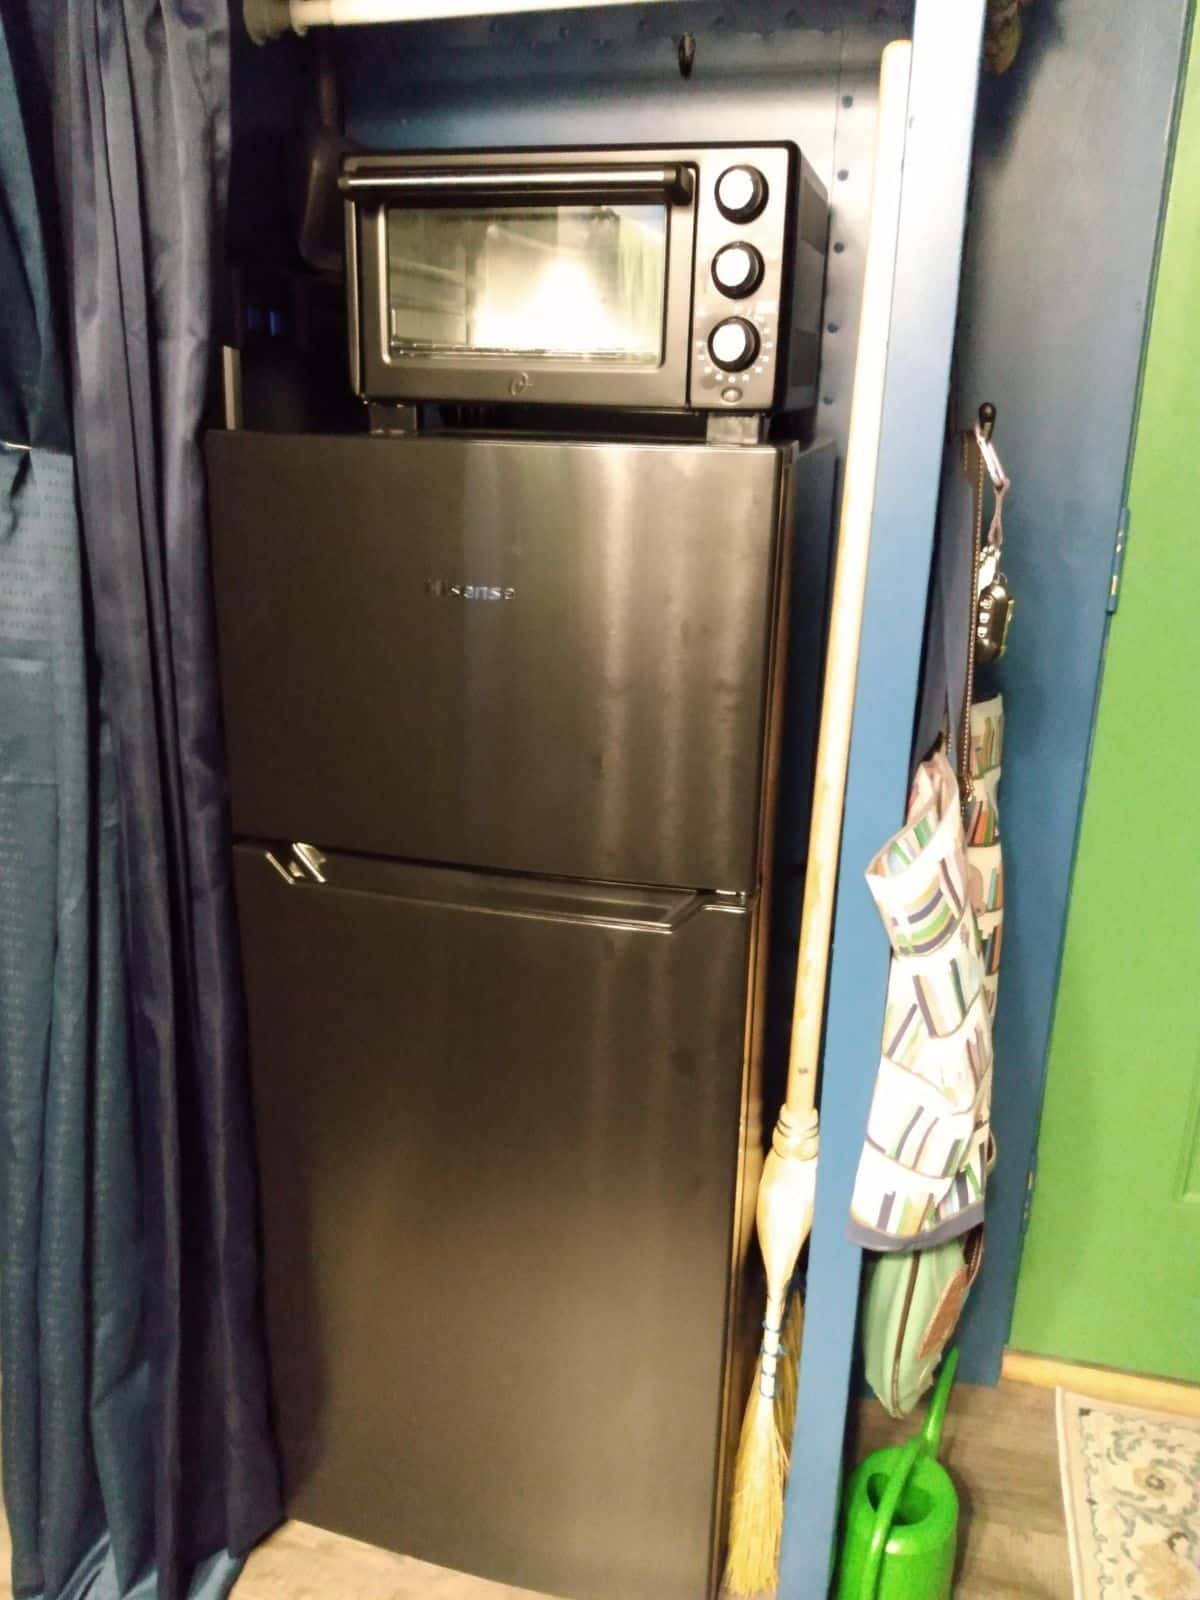 Refrigerator and oven is also included in the deal